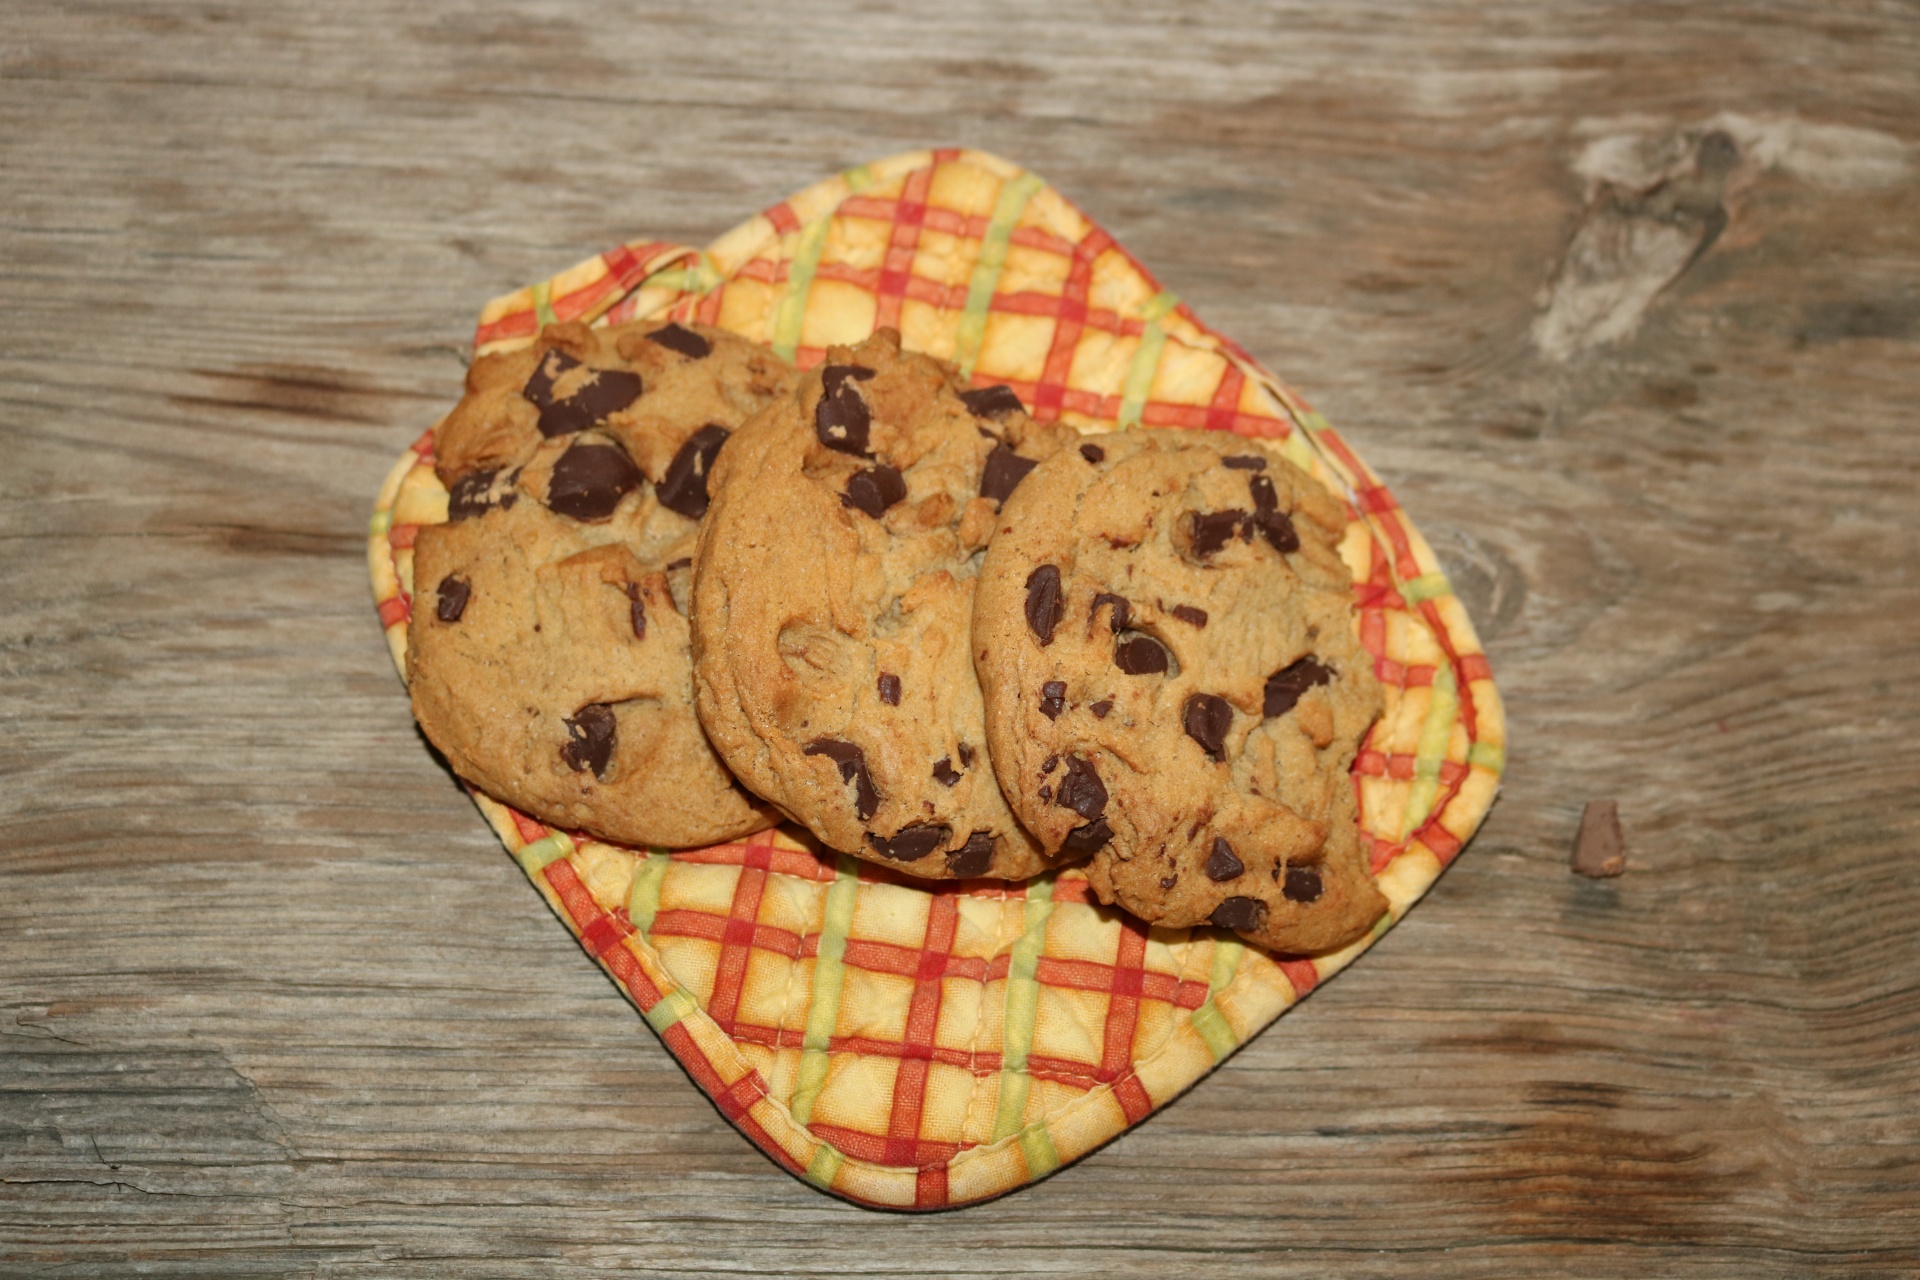 Top view of three chocolate chip cookies on a colorful pot holder, on a wood table.